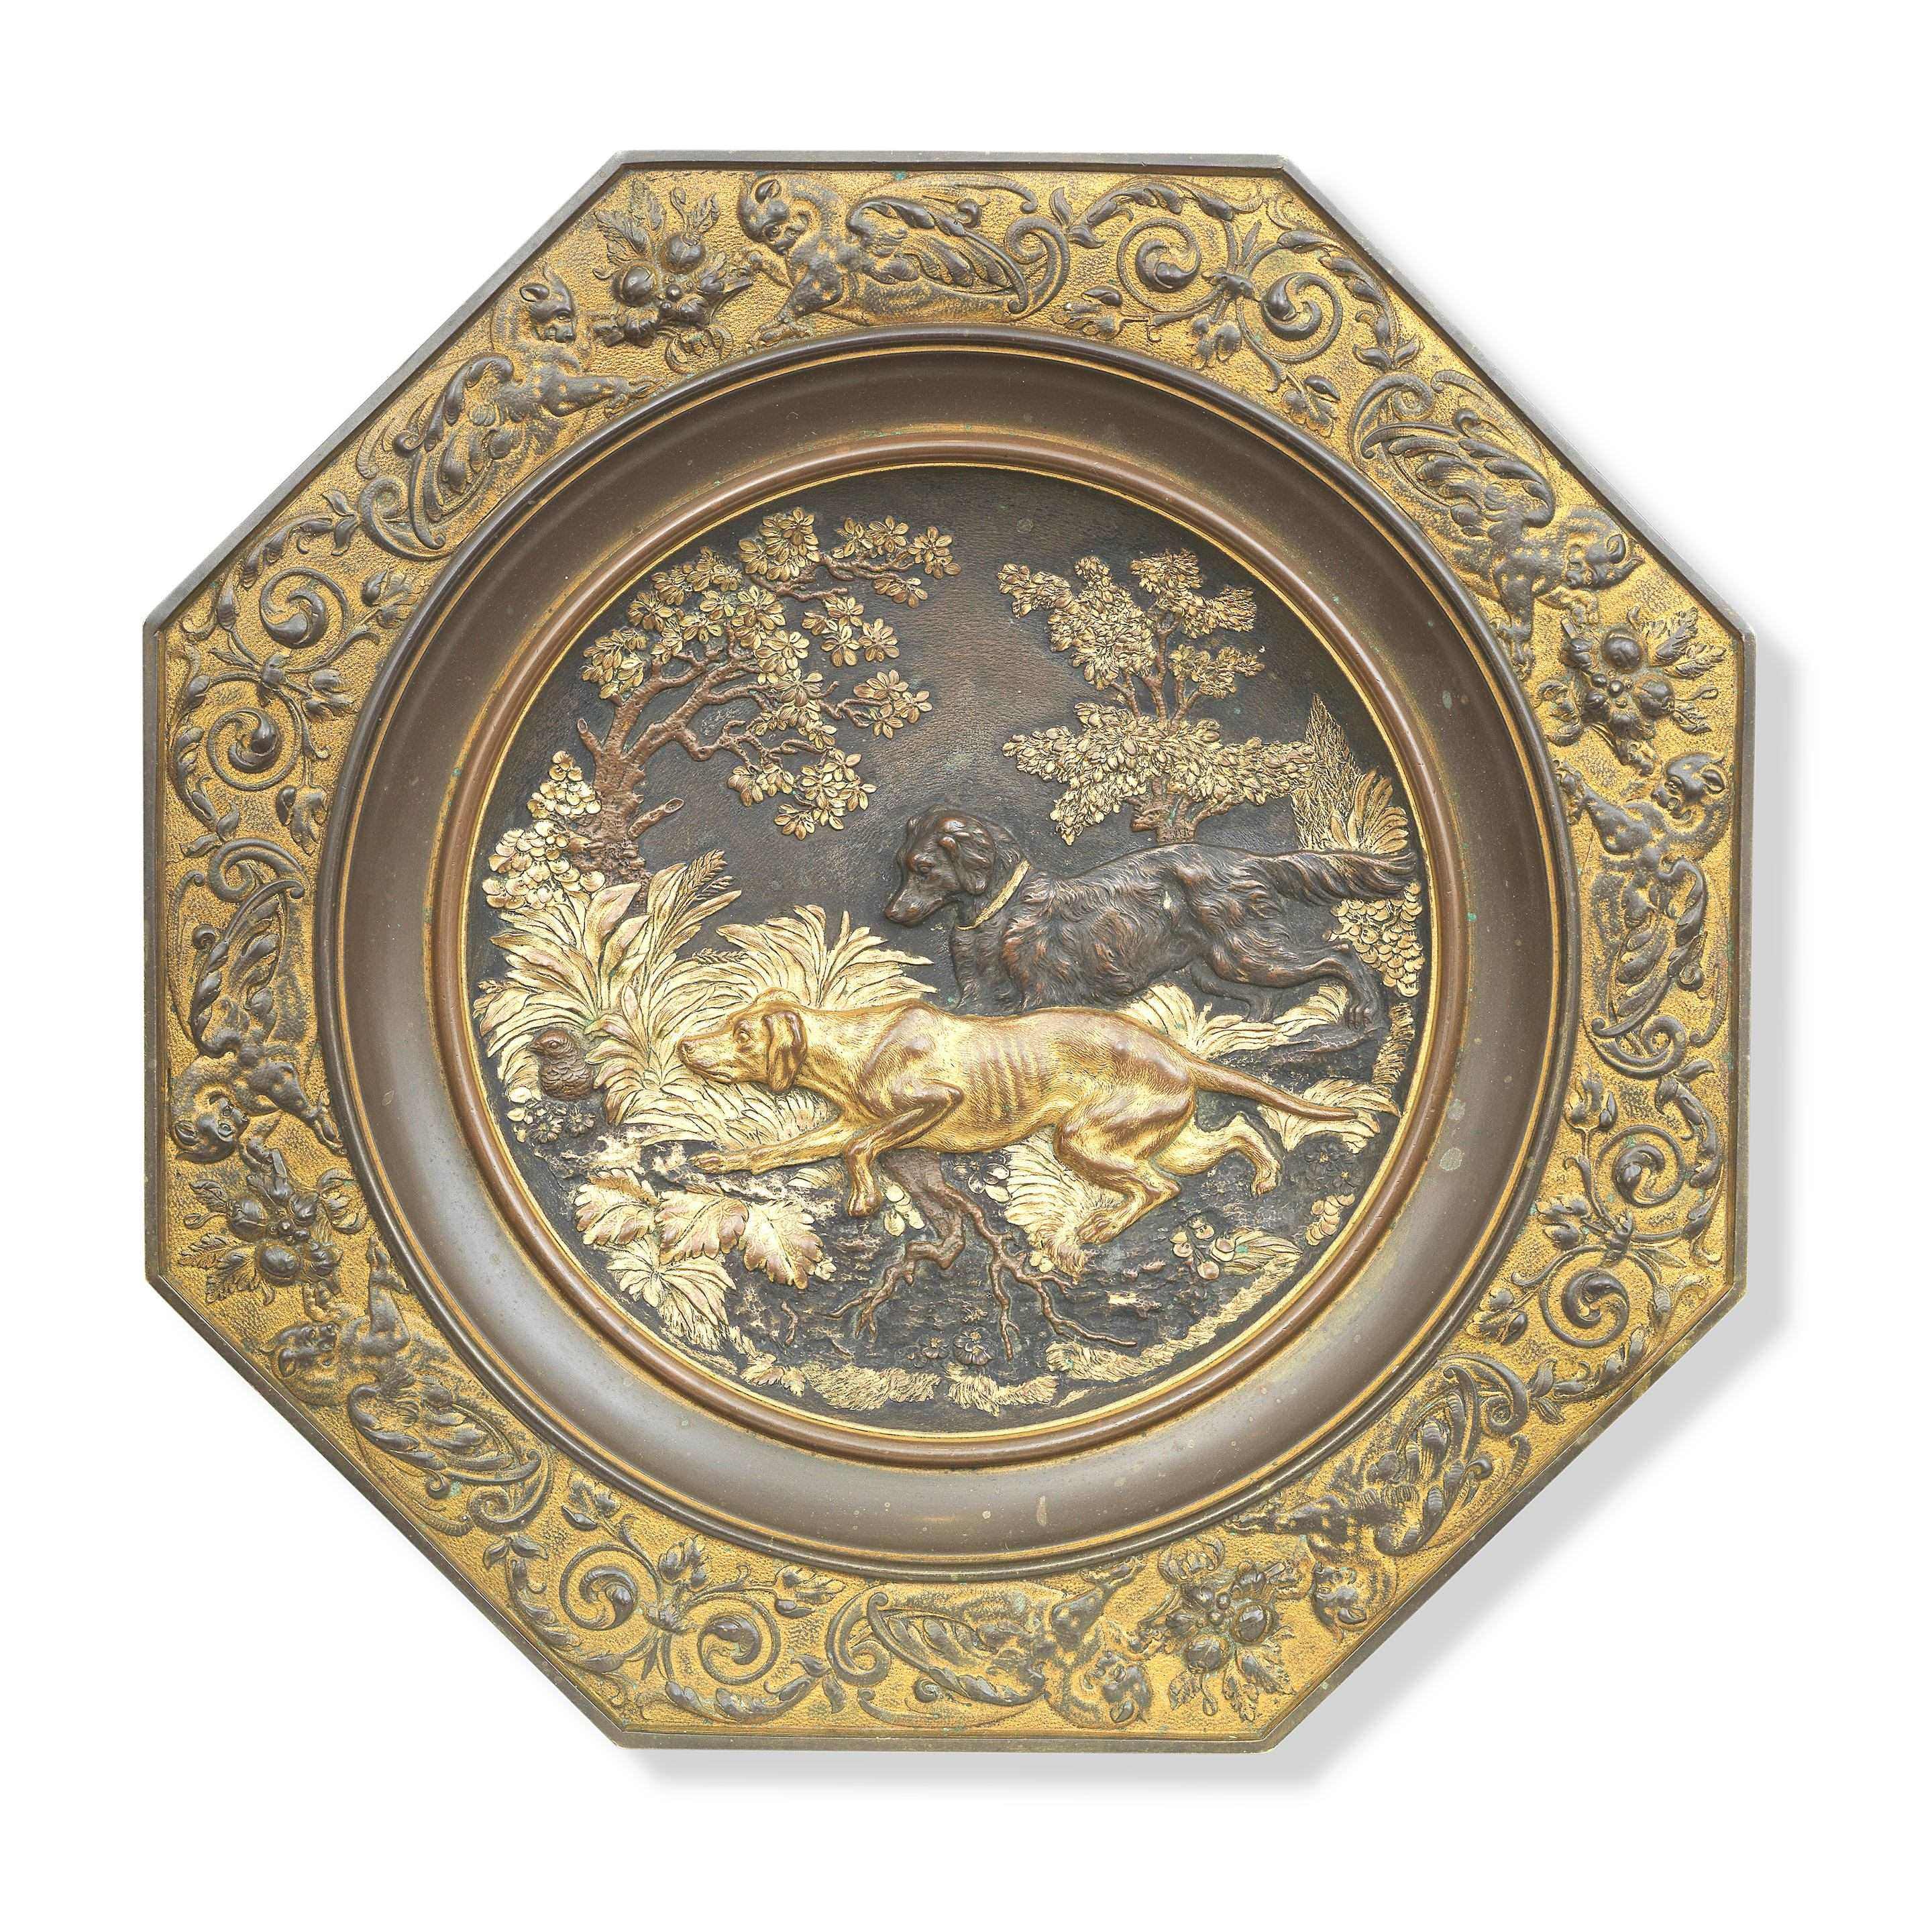 Click for larger image: A hexagonal hunting / La Chasse bronze charger / plate of Pointer and Setter retailed by James Muirhead and Son - A hexagonal hunting / La Chasse bronze charger / plate of Pointer and Setter retailed by James Muirhead and Son